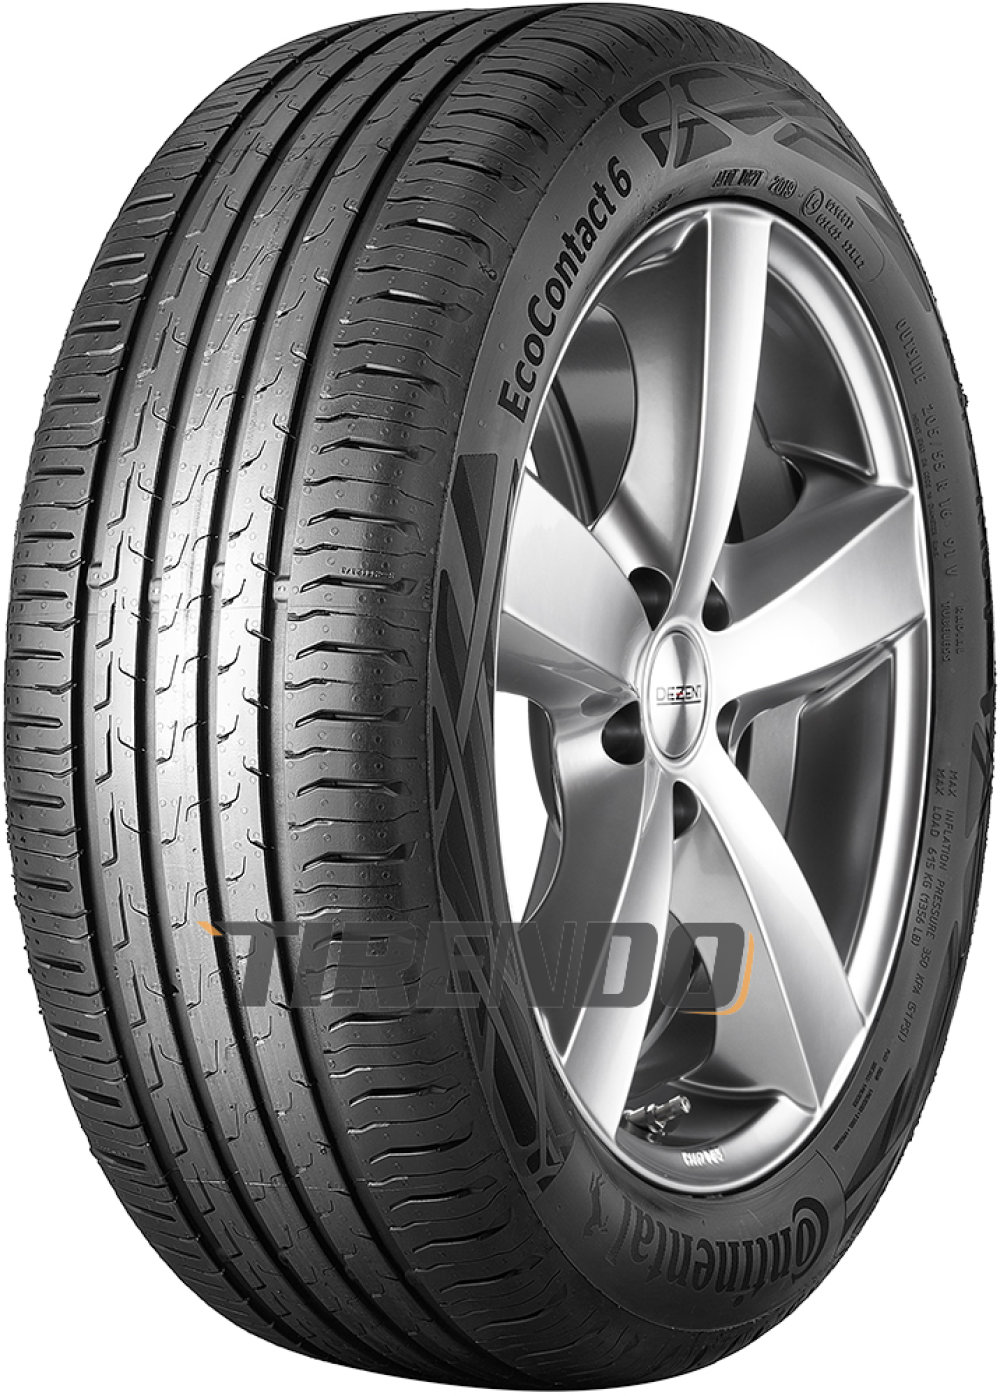 Image of Continental EcoContact 6 ( 195/60 R18 96H XL Conti Seal, EVc )